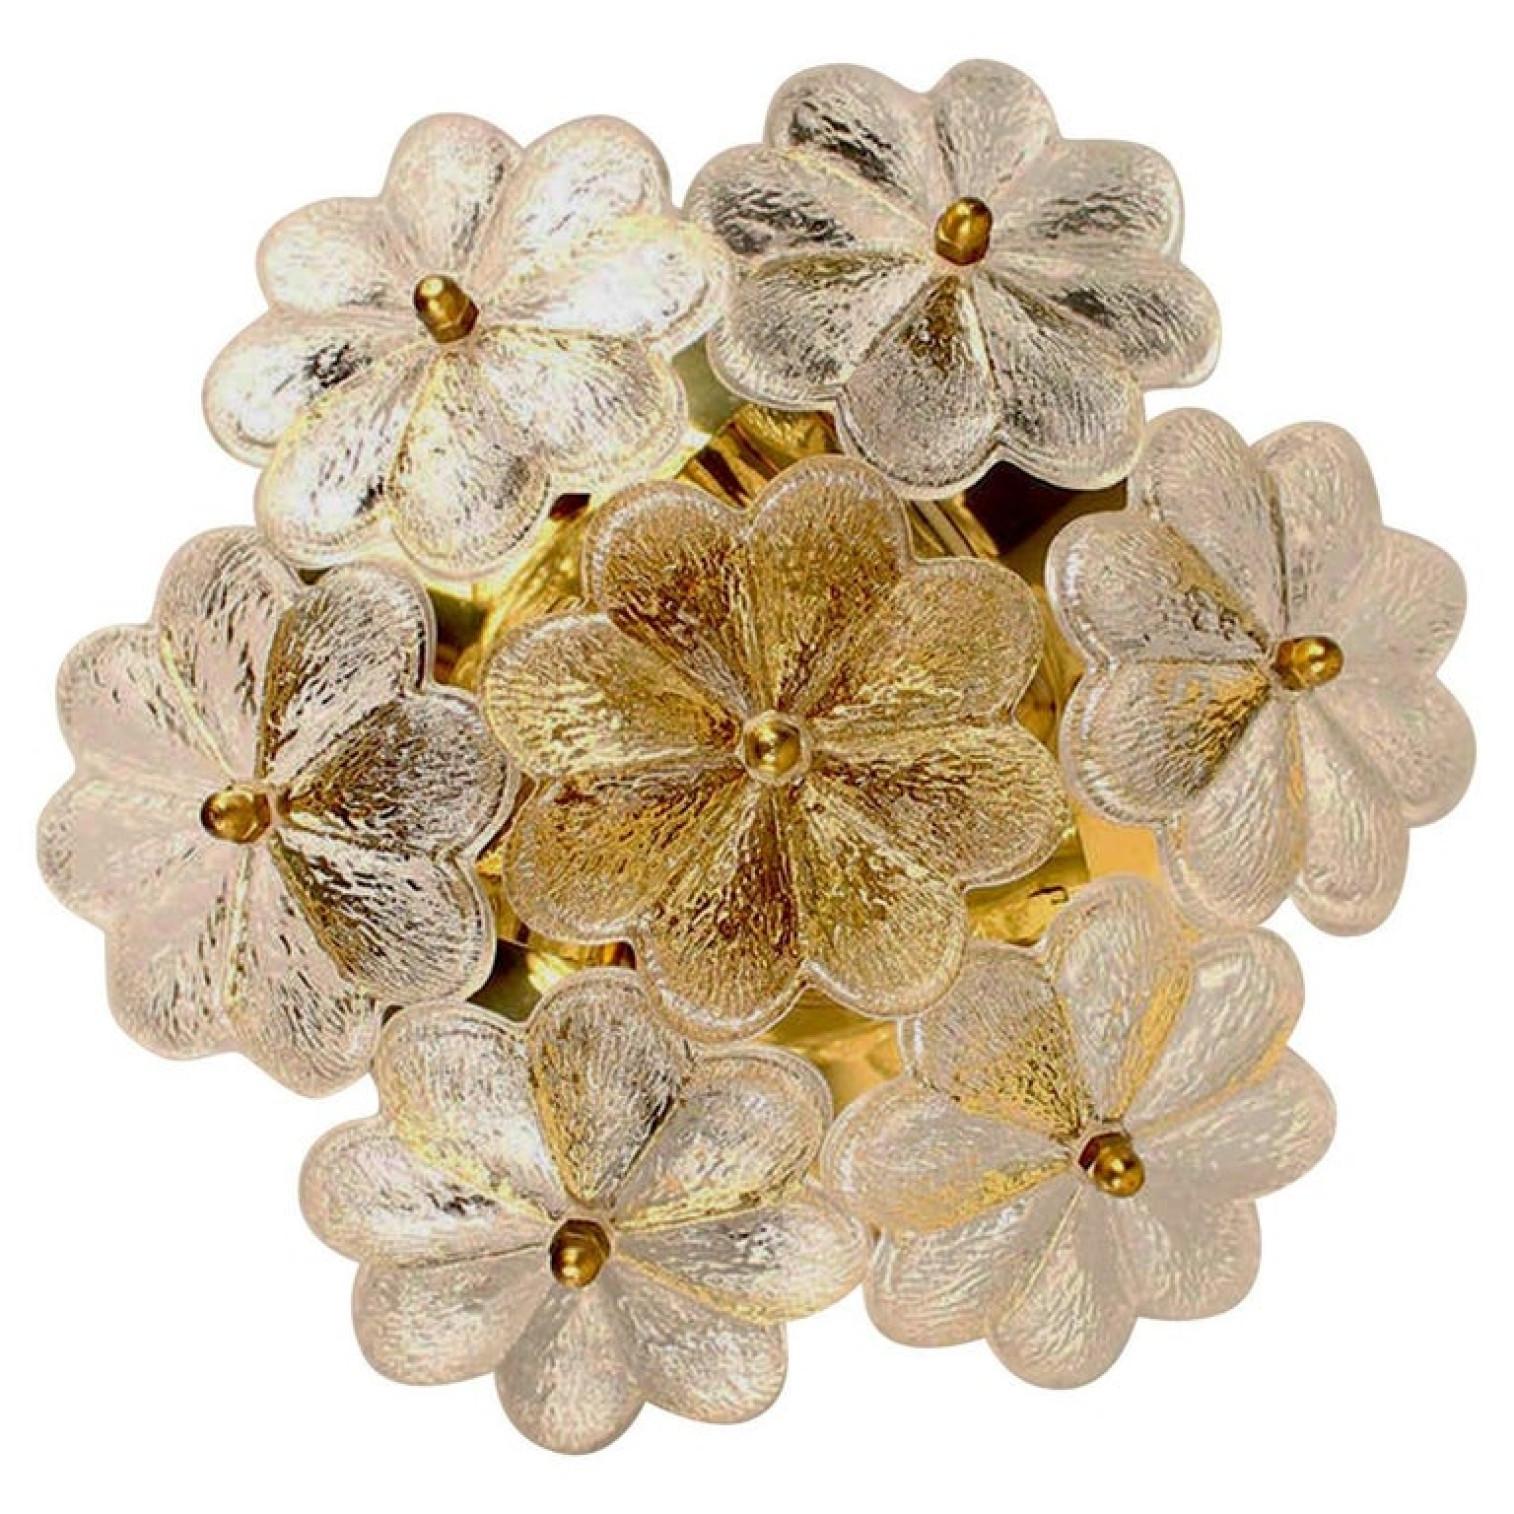 These sculptural wall sconces have the design of a bouquet of textured glass flowers and are from the historical lighting company Ernst Palme. Each light has seven glass shades.

Each clear glass flower shade has textured petals and is securely